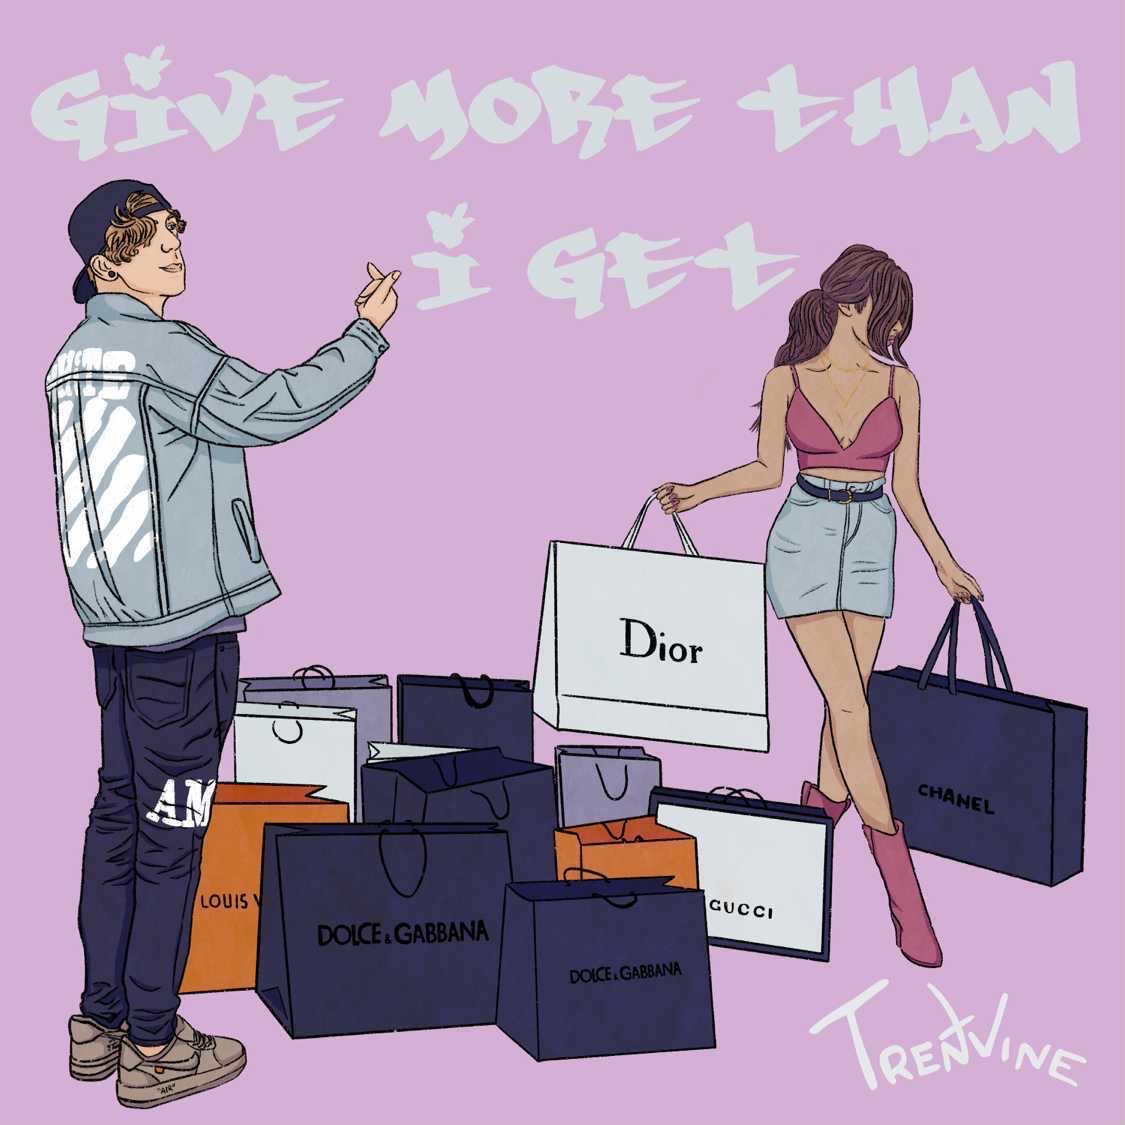 Album art with Trent standing next to a woman holding shopping bags.